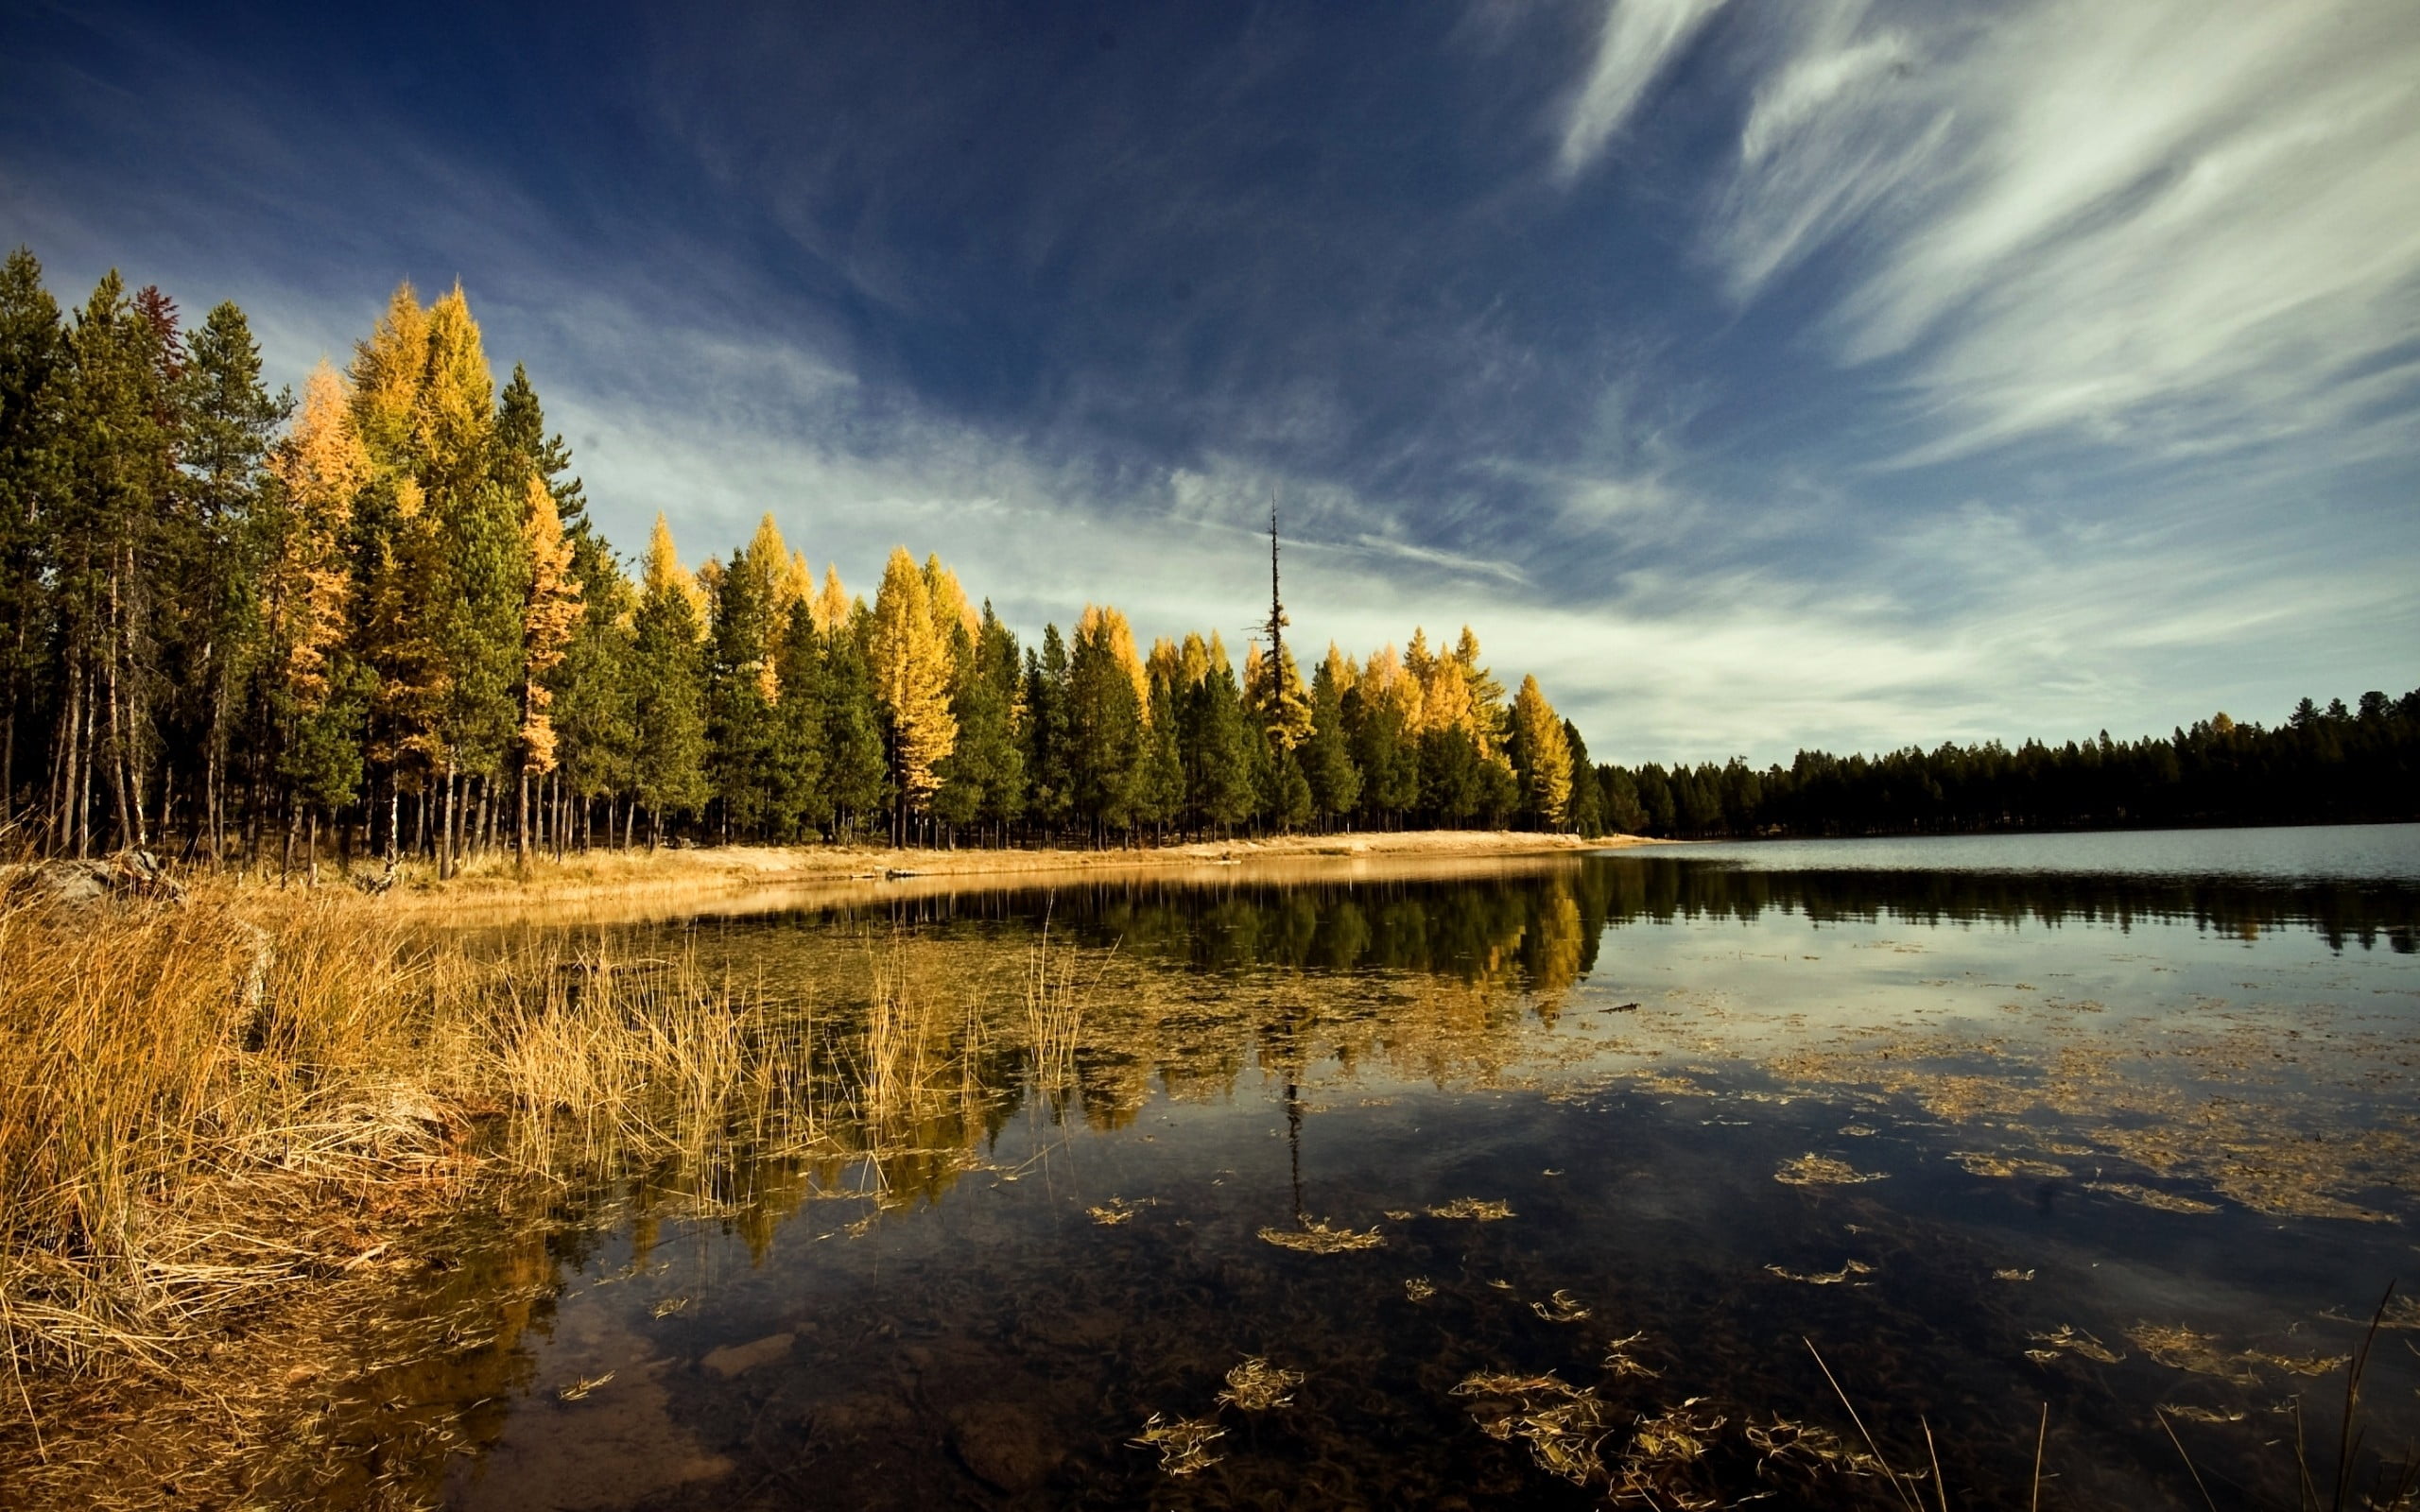 landscape photography of body of water and trees